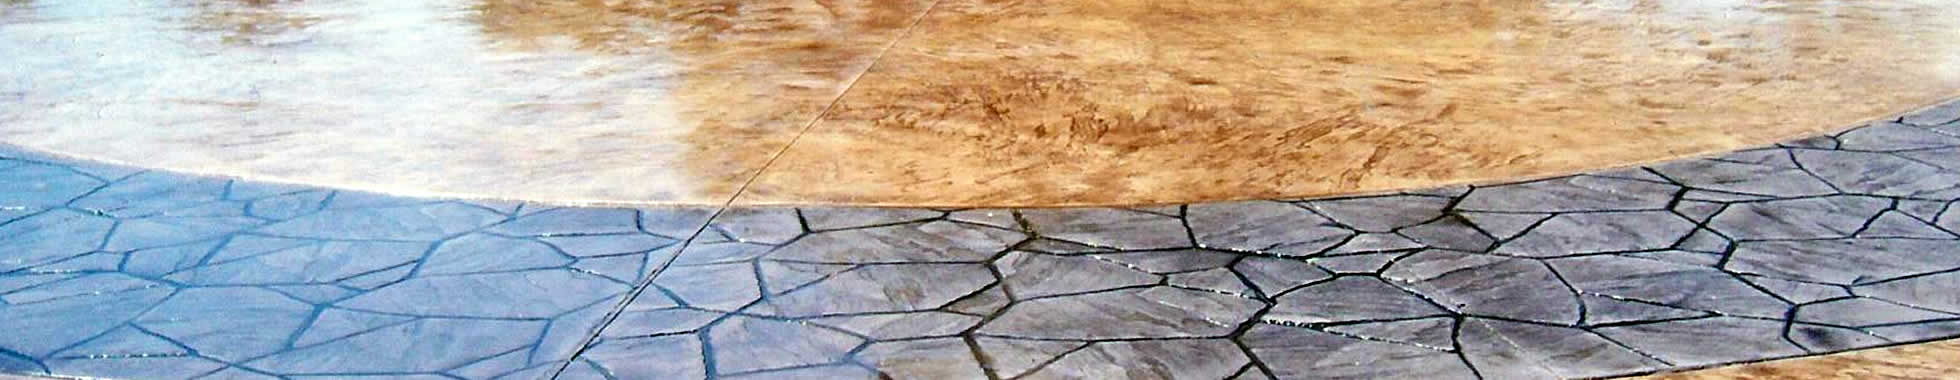 Decorative Concrete - Stamped/Colored/Overlays/Staining/Polishing Services near me